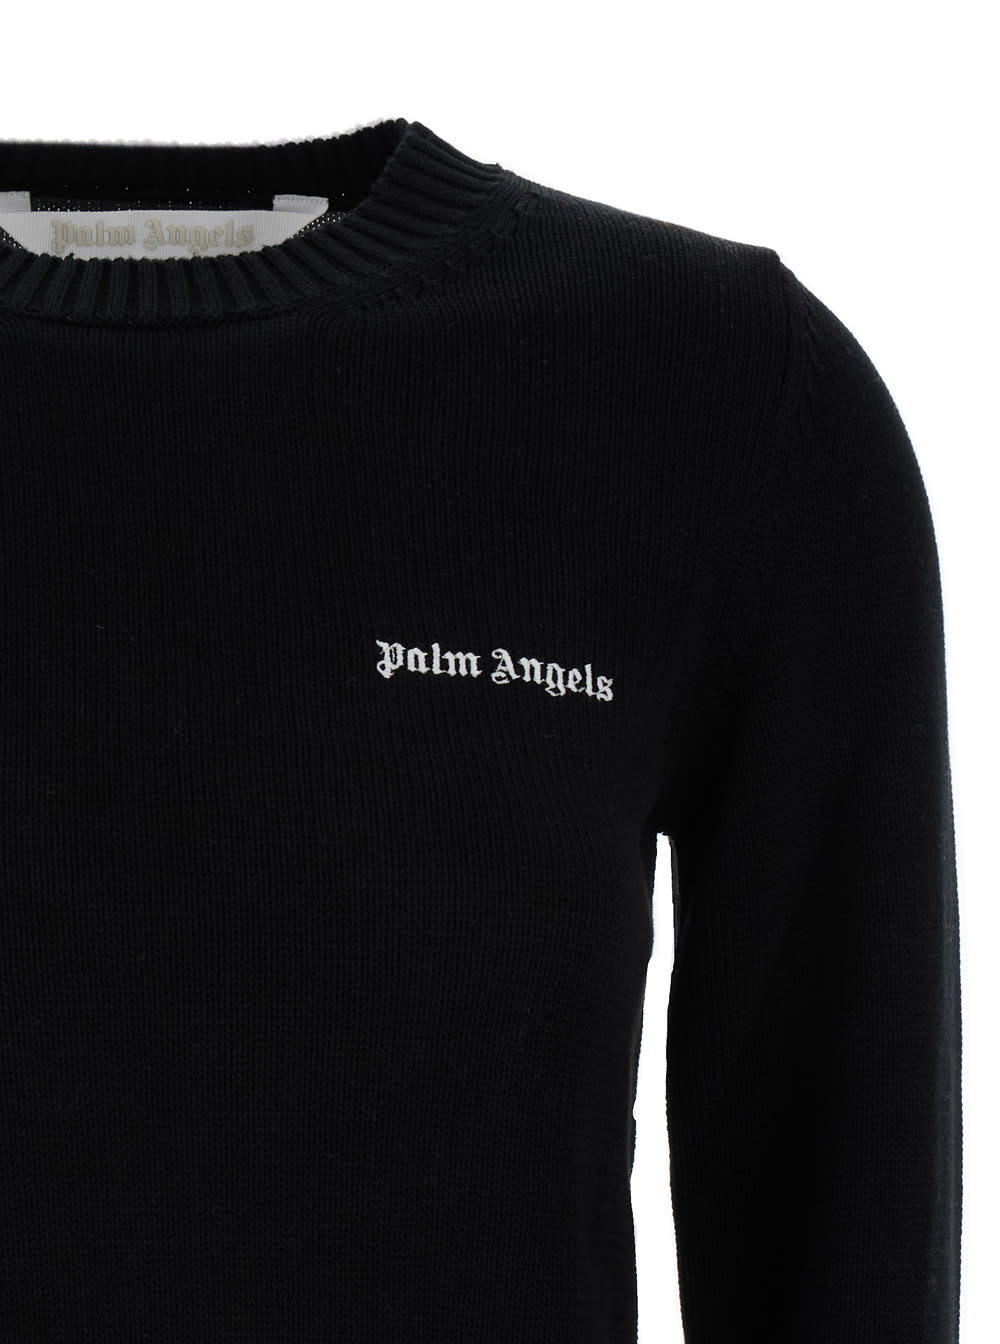 Shop Palm Angels Black Crewneck Sweater With Emboridered Logo In Cotton Woman